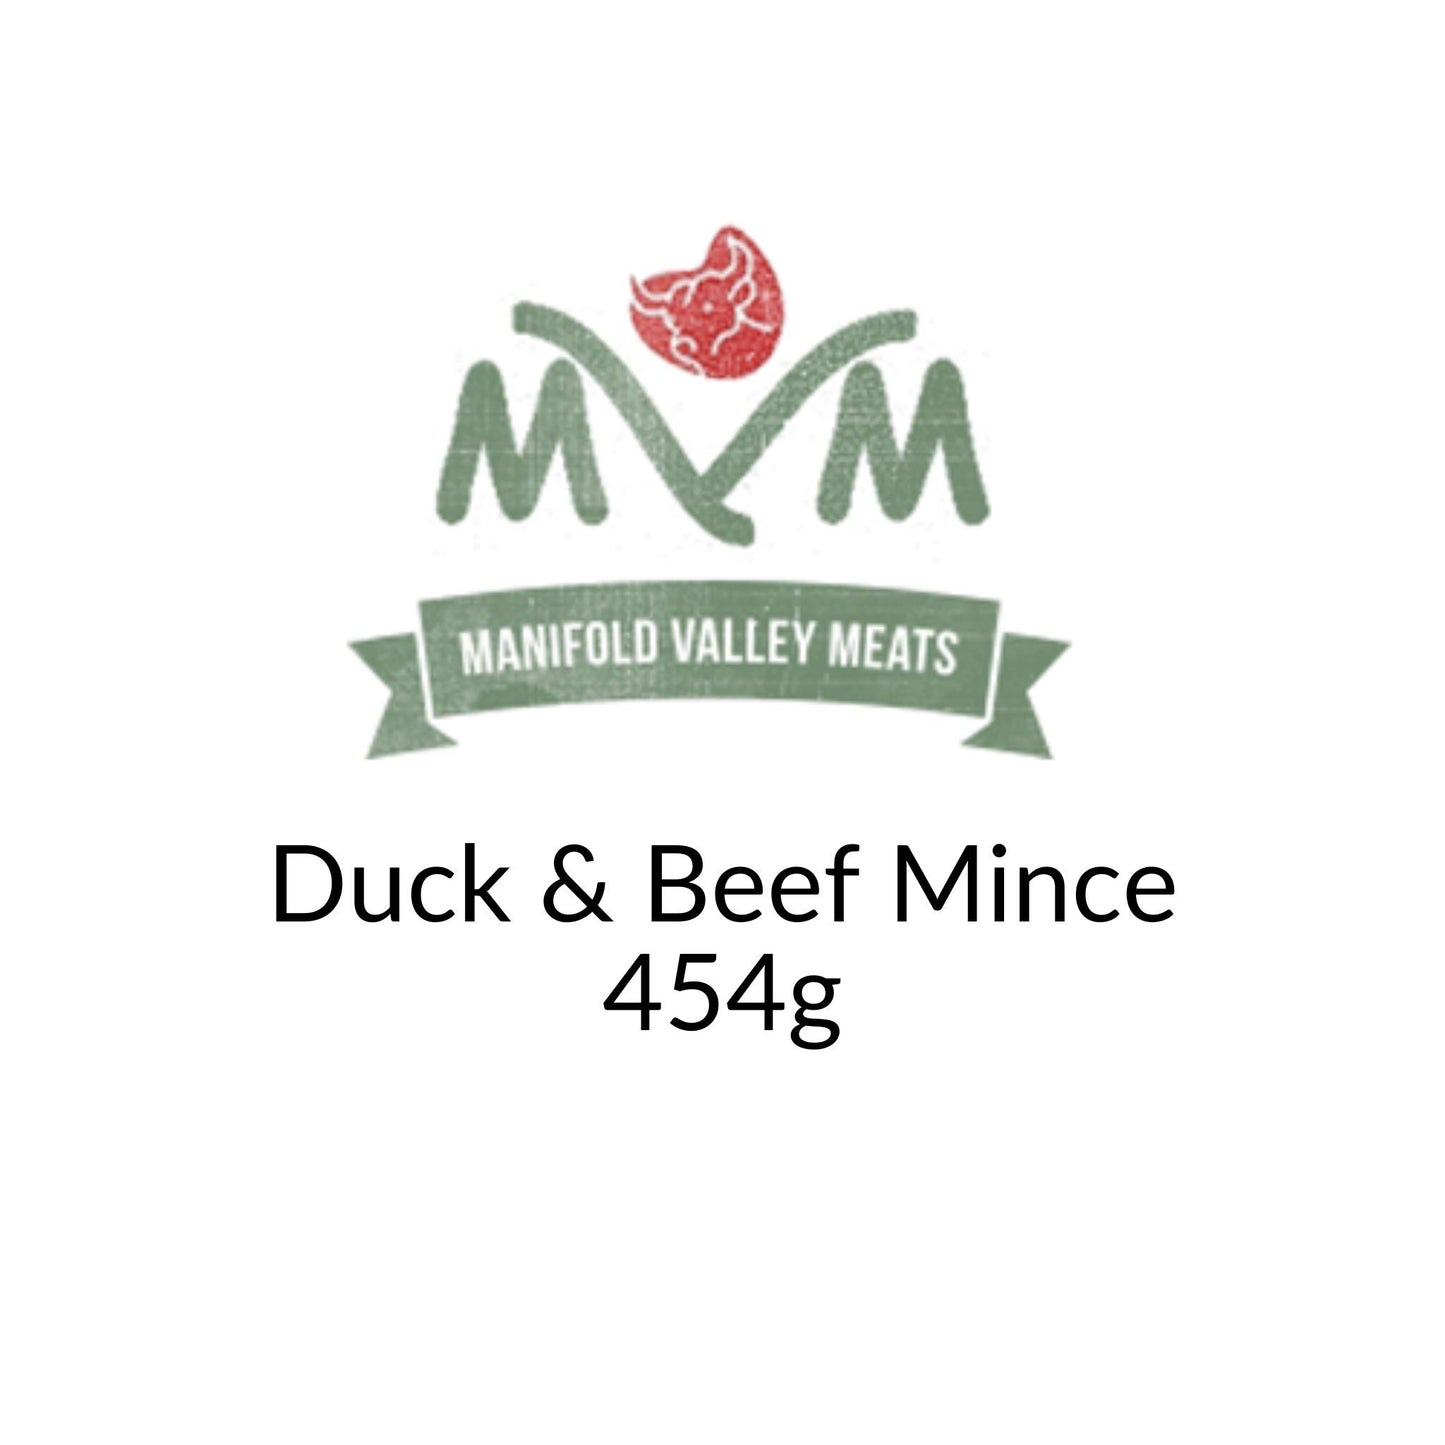 Manifold Valley Meats Duck and Beef Mince Raw Dog Food